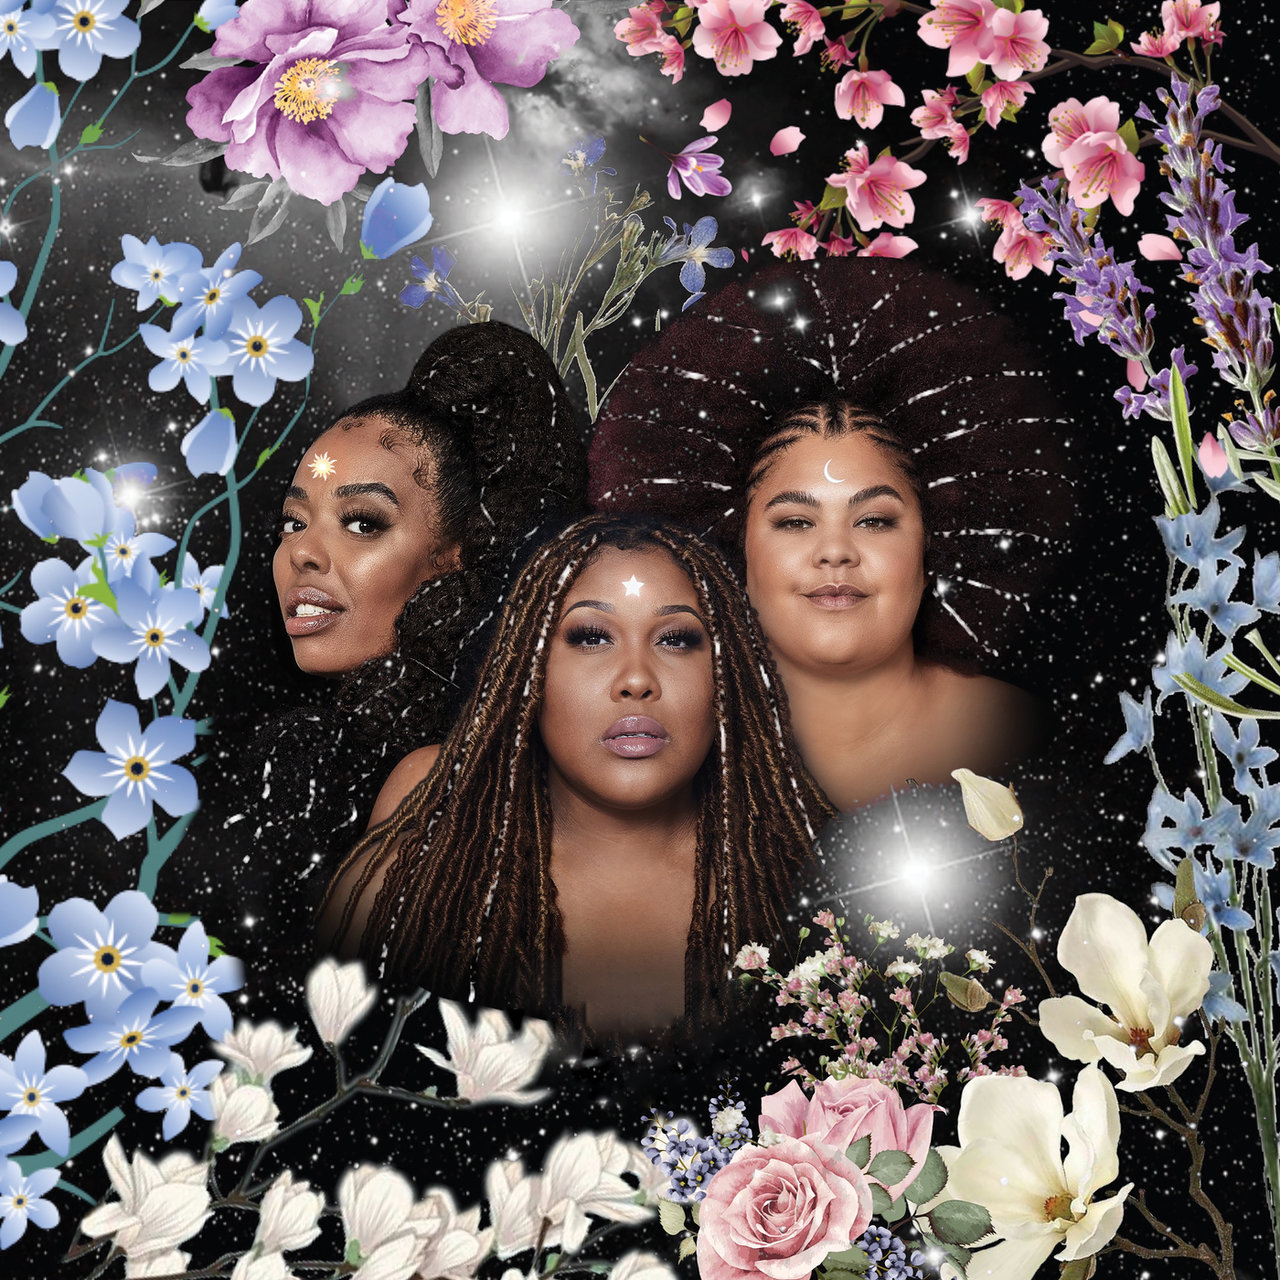 The Mamas In the Middle cover artwork